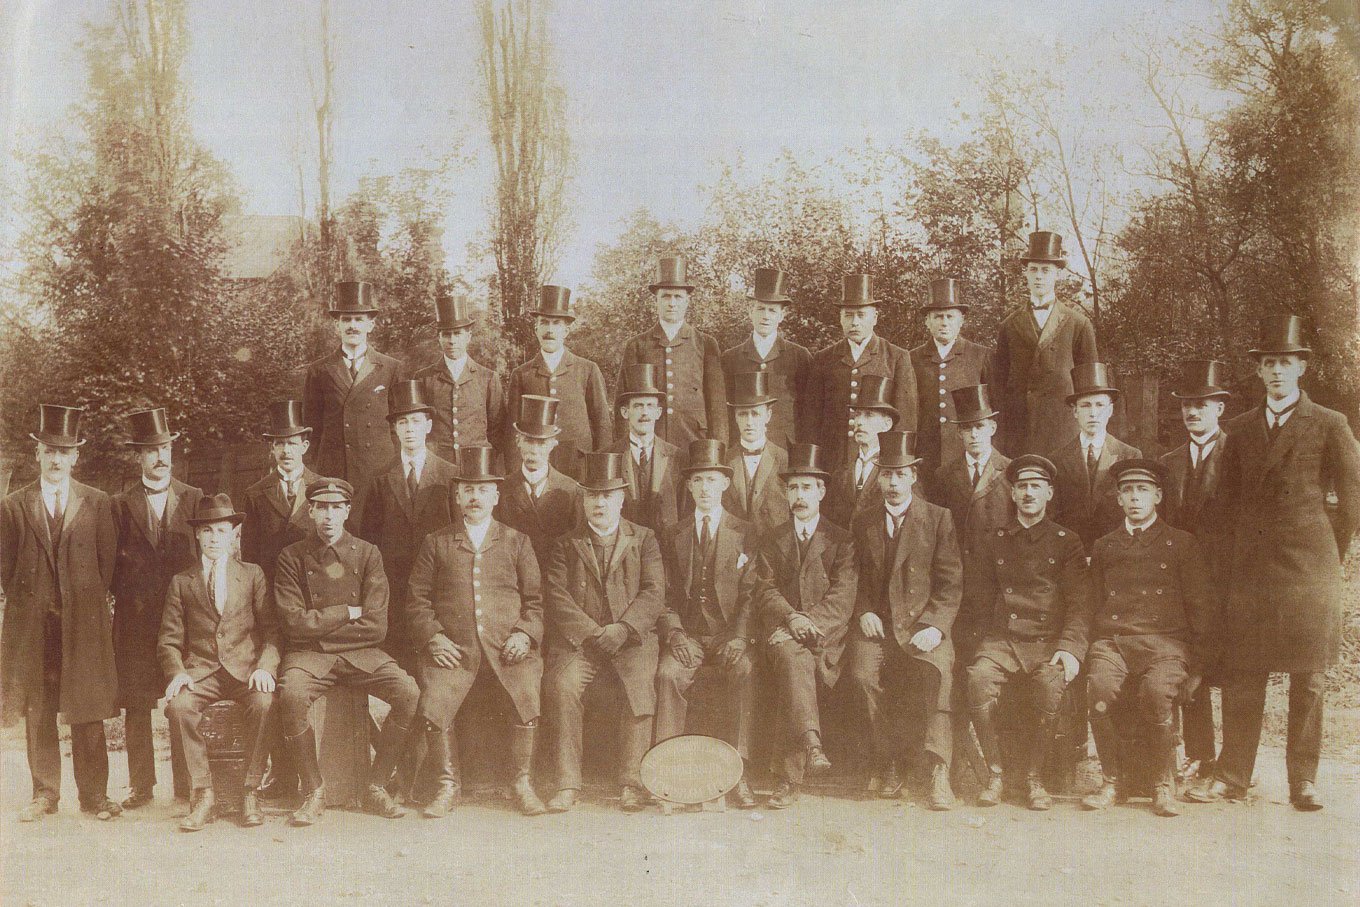 An historical image of the team from Francis Chappell funeral directors